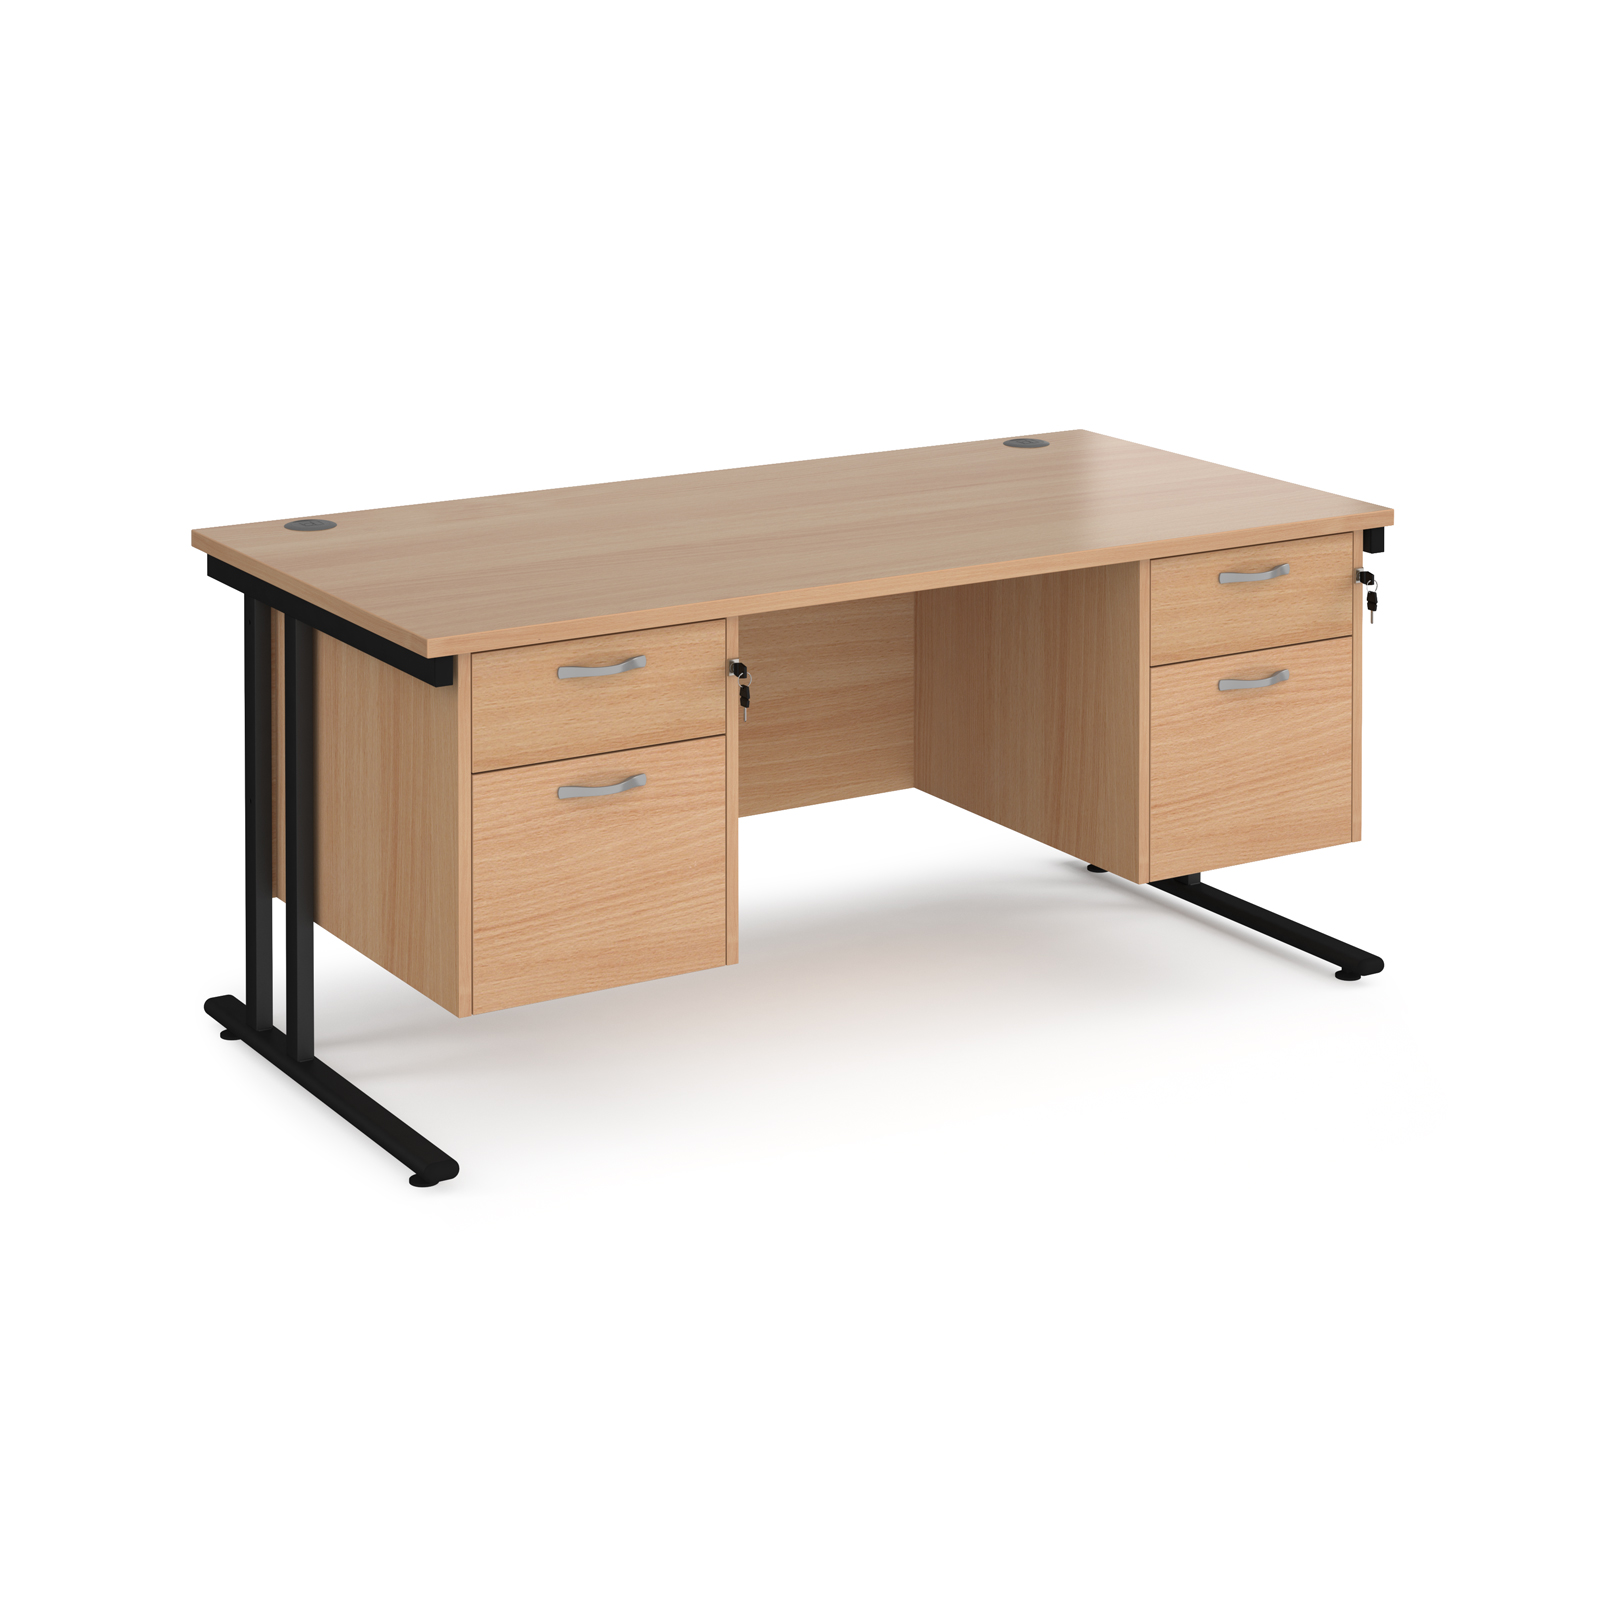 Maestro 25 straight desk 1600mm x 800mm with two x 2 drawer pedestals - black cantilever leg frame, beech top